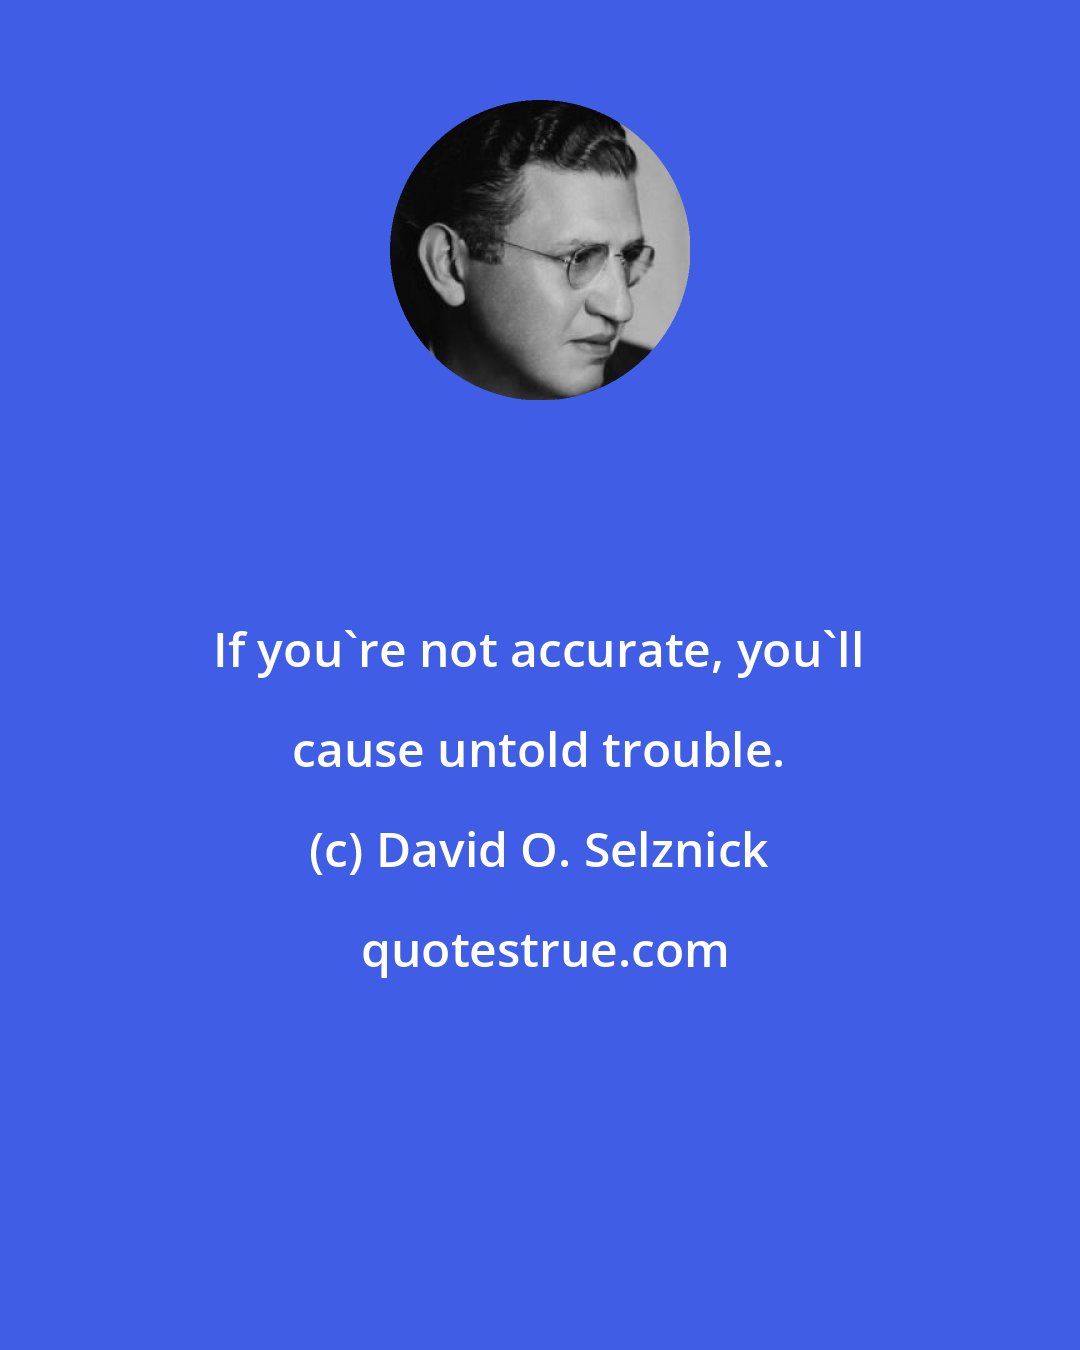 David O. Selznick: If you're not accurate, you'll cause untold trouble.